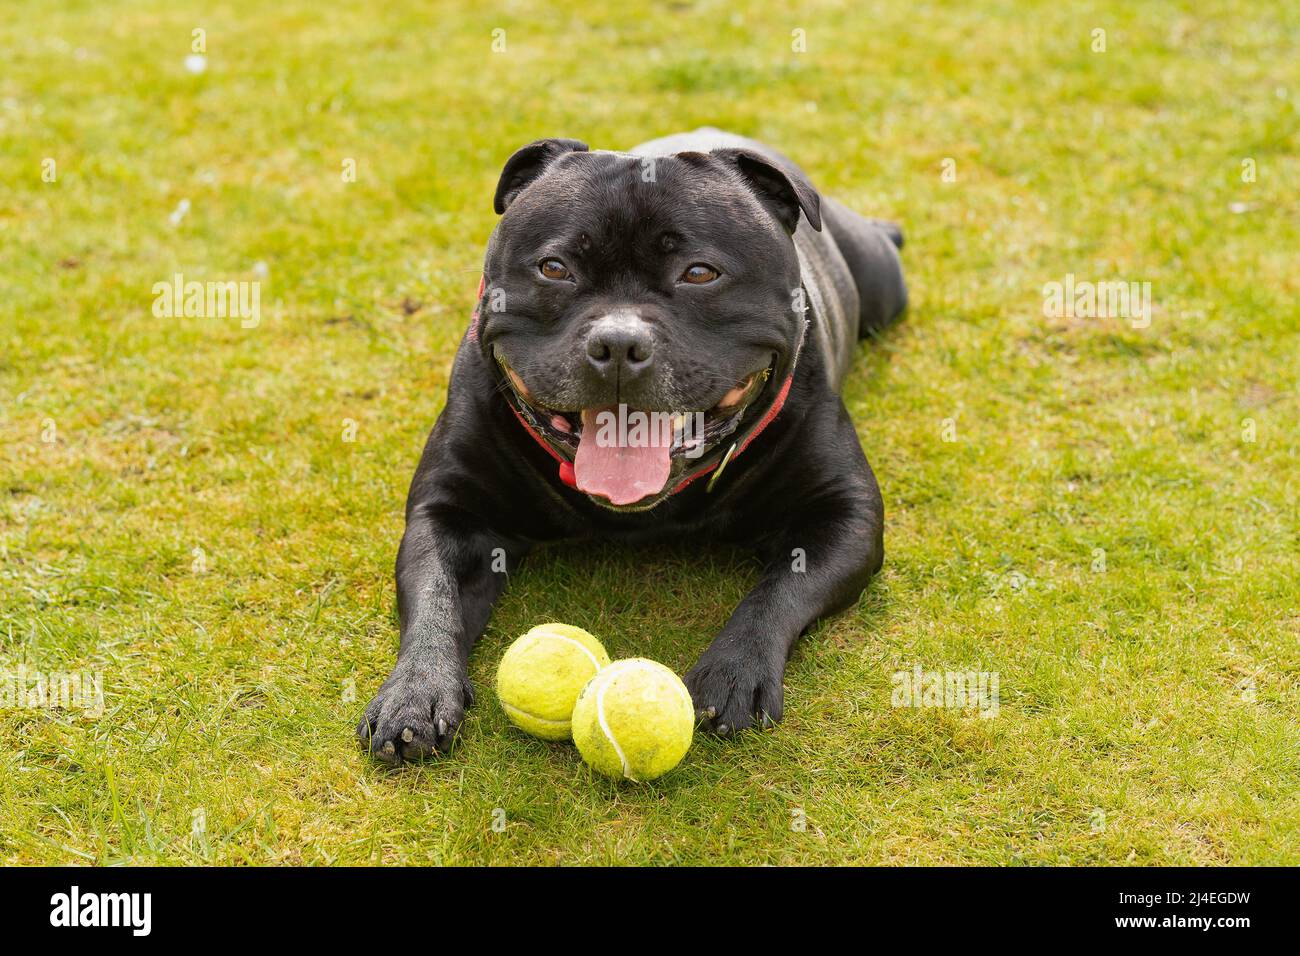 Staffordshire Bull Terrier dog lying down on grass. He is looking the camera smiling. There are two tennis balls in front of him Stock Photo